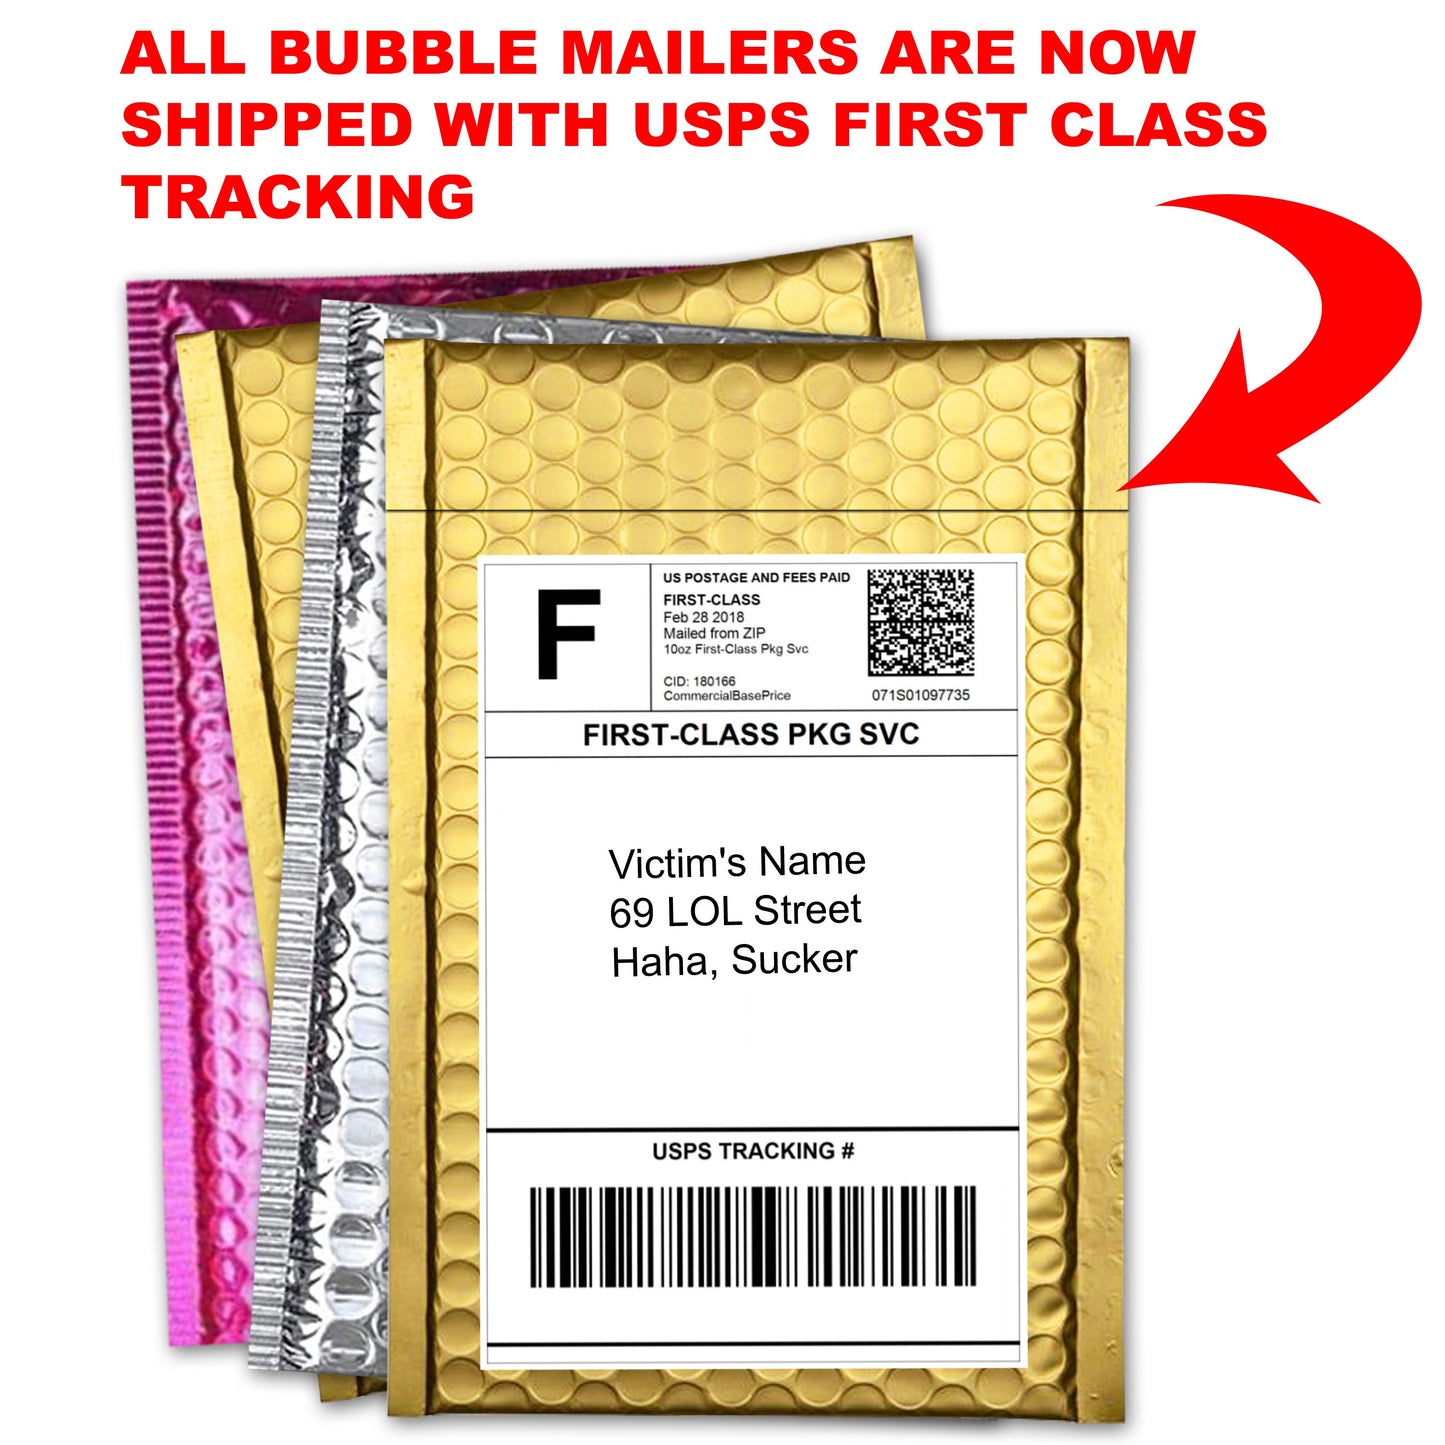 IBS Diarrhea embarrassing prank envelope gets mailed directly to your victims 100% anonymously!